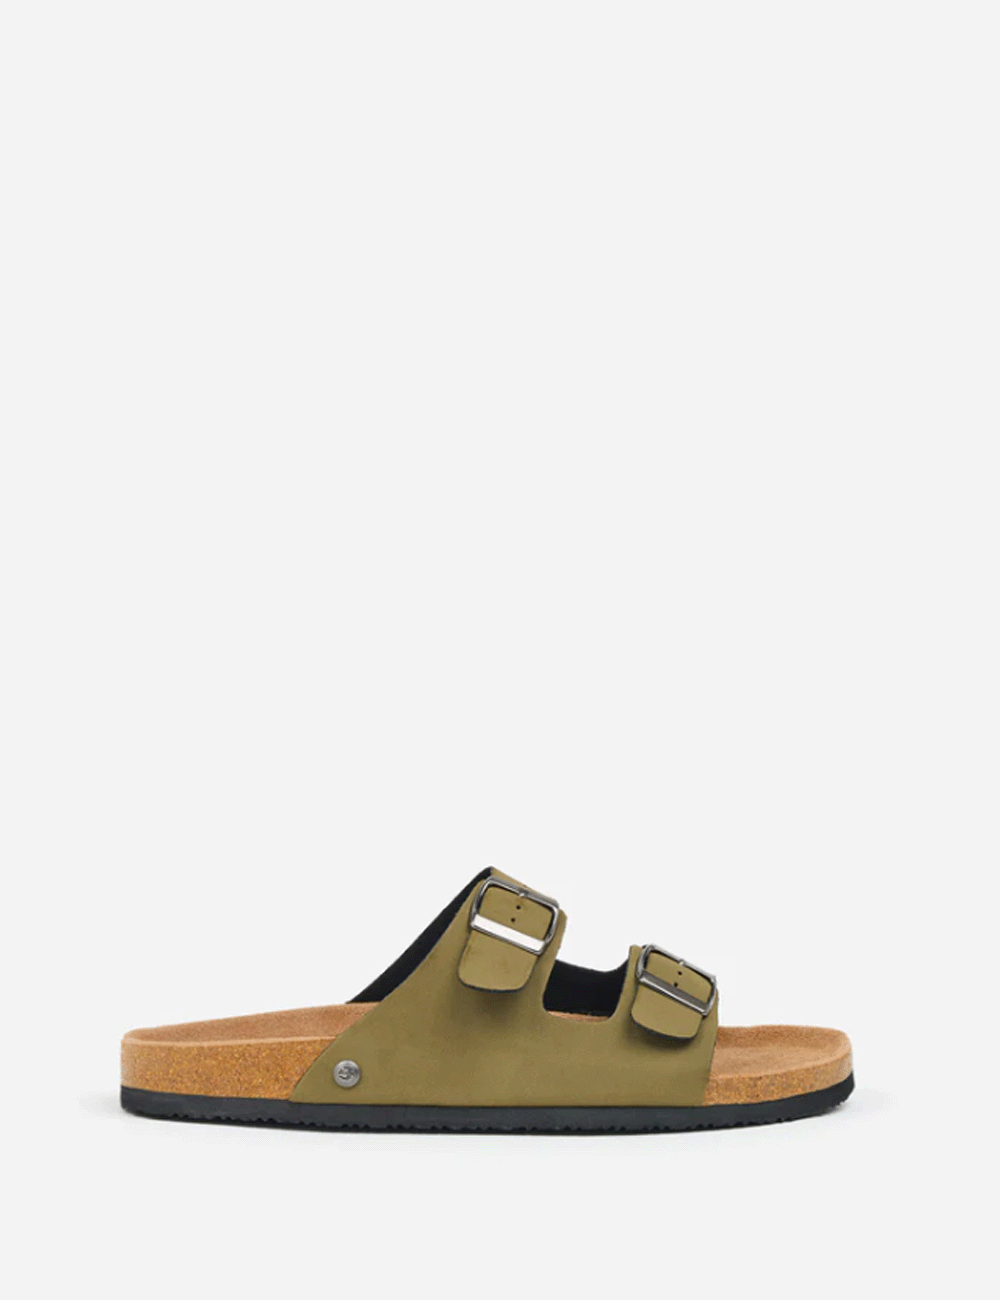 Outside of right foot of the Khaki Sandals on a grey background